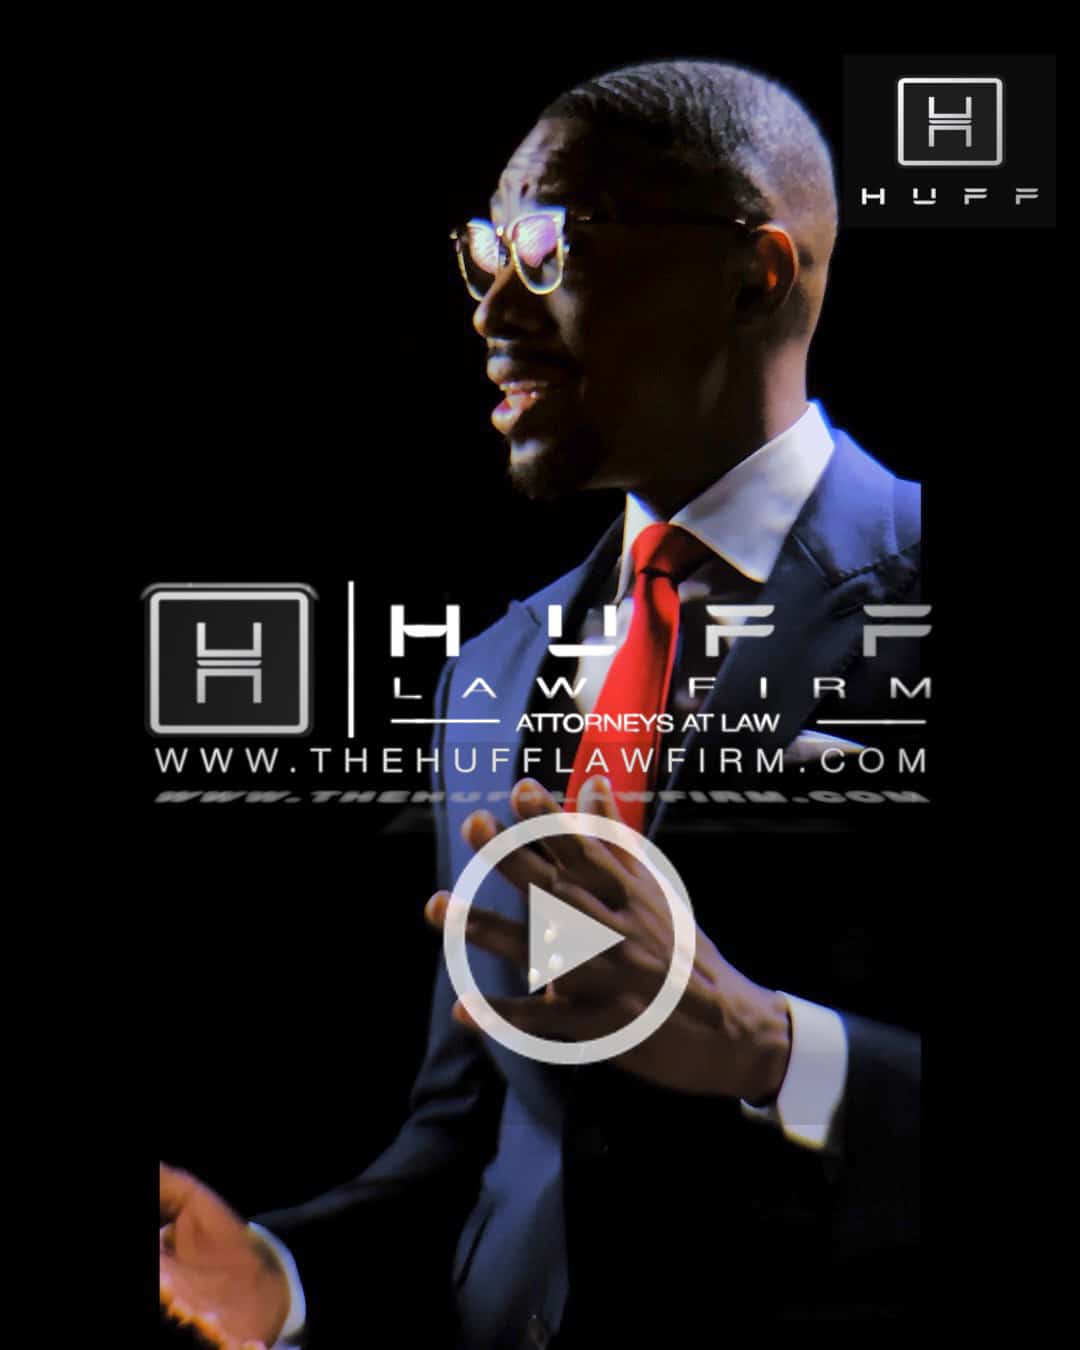 Call Houston Assault Lawyer Korey Huff Today. Houston Domestic Violence Attorney at The Huff law Firm